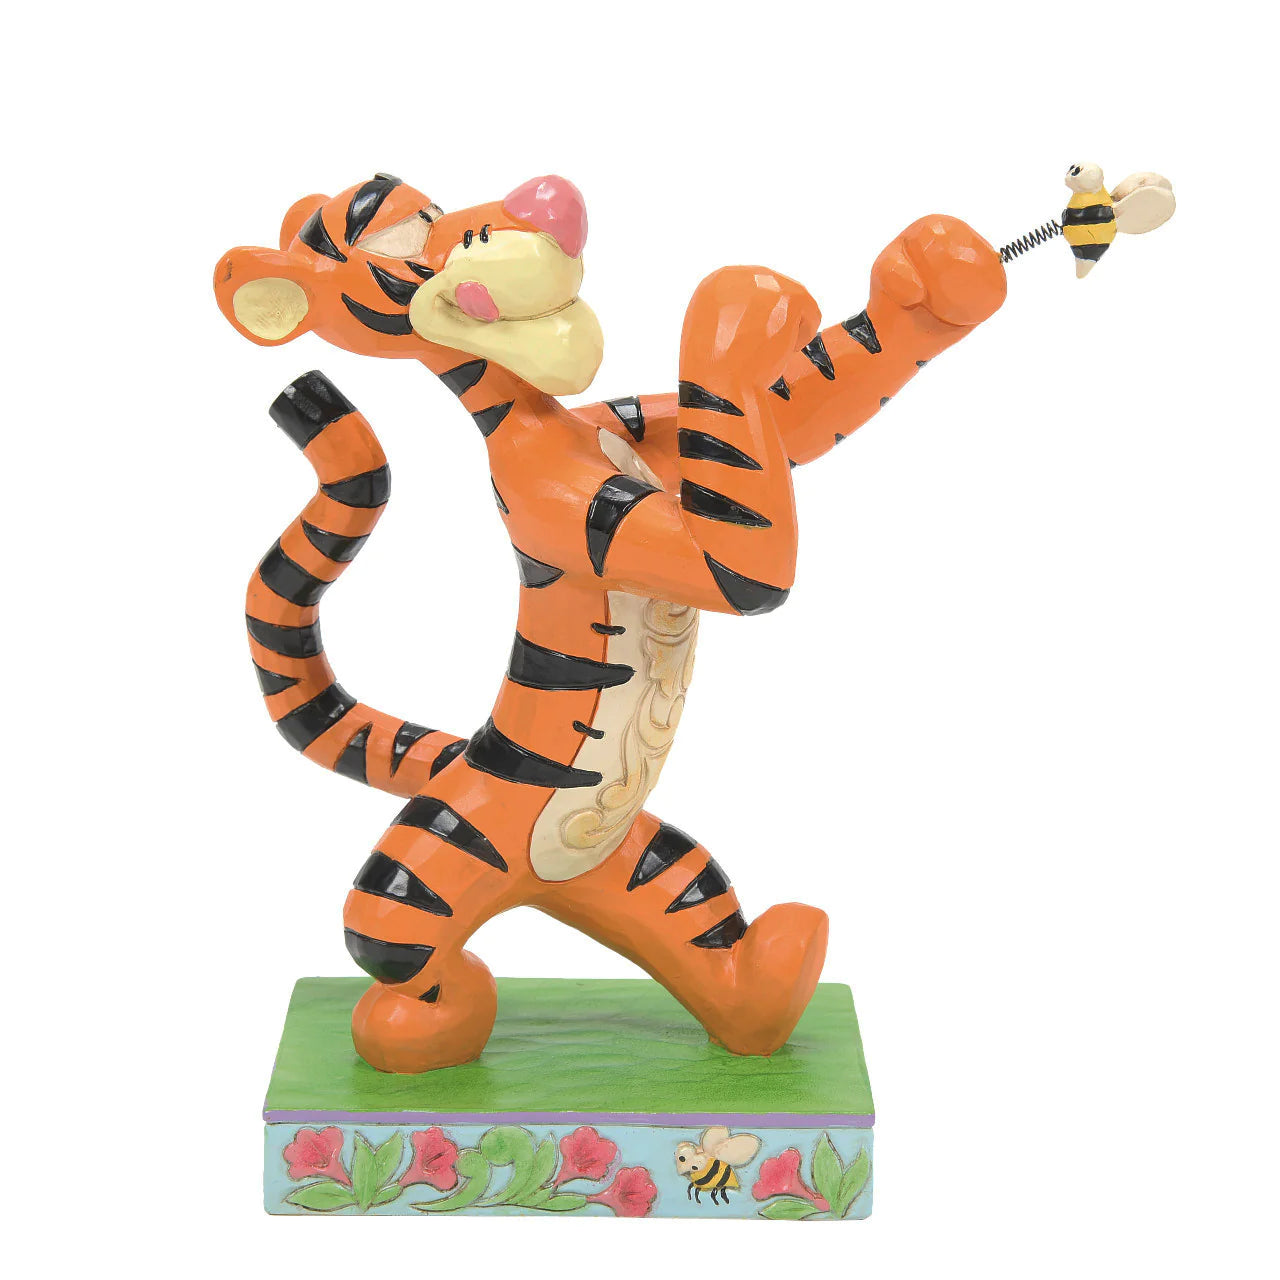 Tigger Whinne the Pooh "Bee Boxing" Disney Tradtions Jime Shore Statue